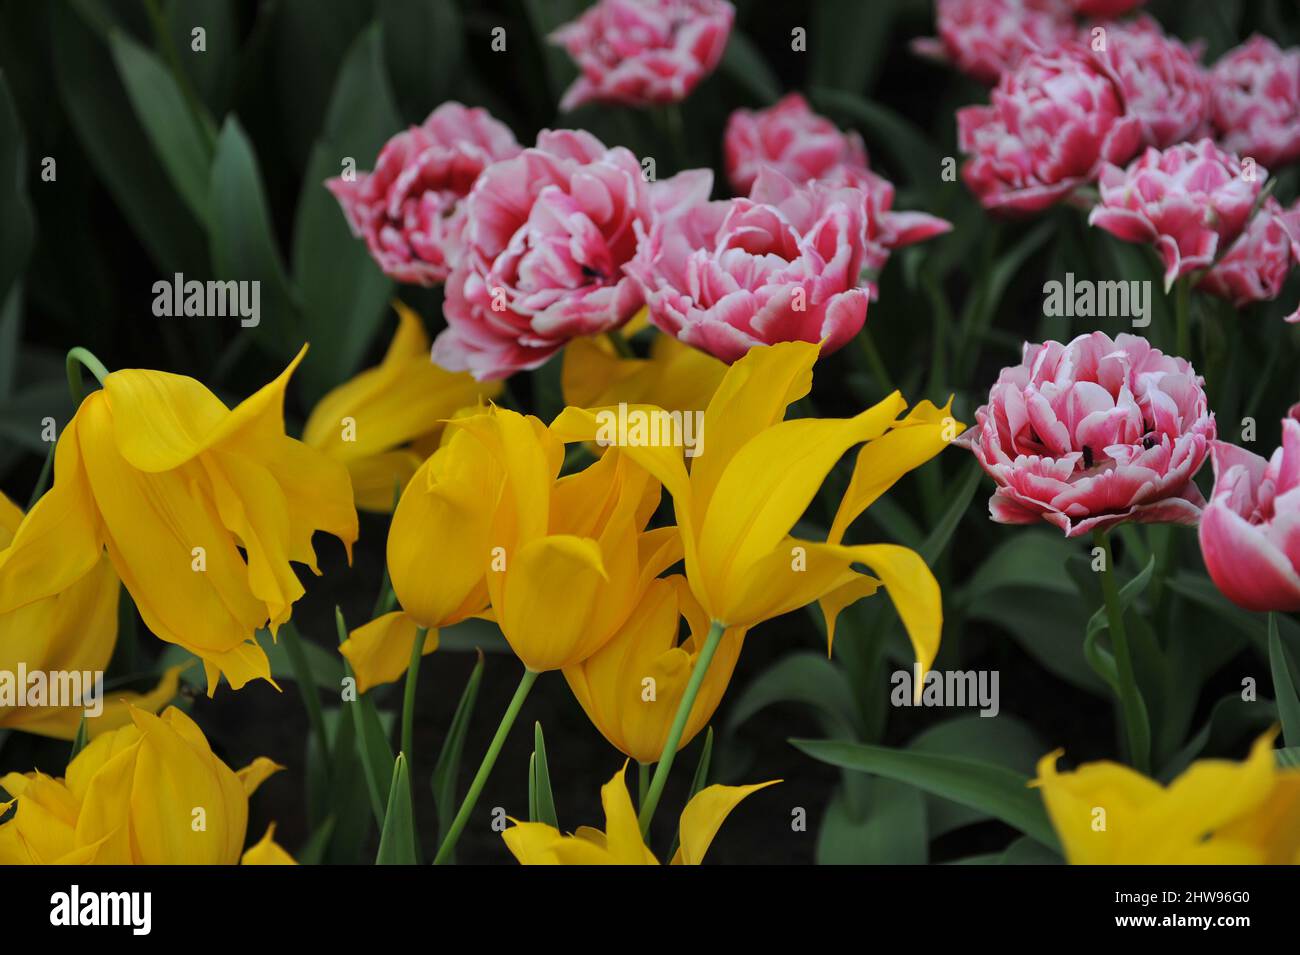 Yellow lily-flowered tulip (Tulipa) La Perla and red and white peony-flowered Double Late tulip Dazzling Desire bloom in a garden in April Stock Photo